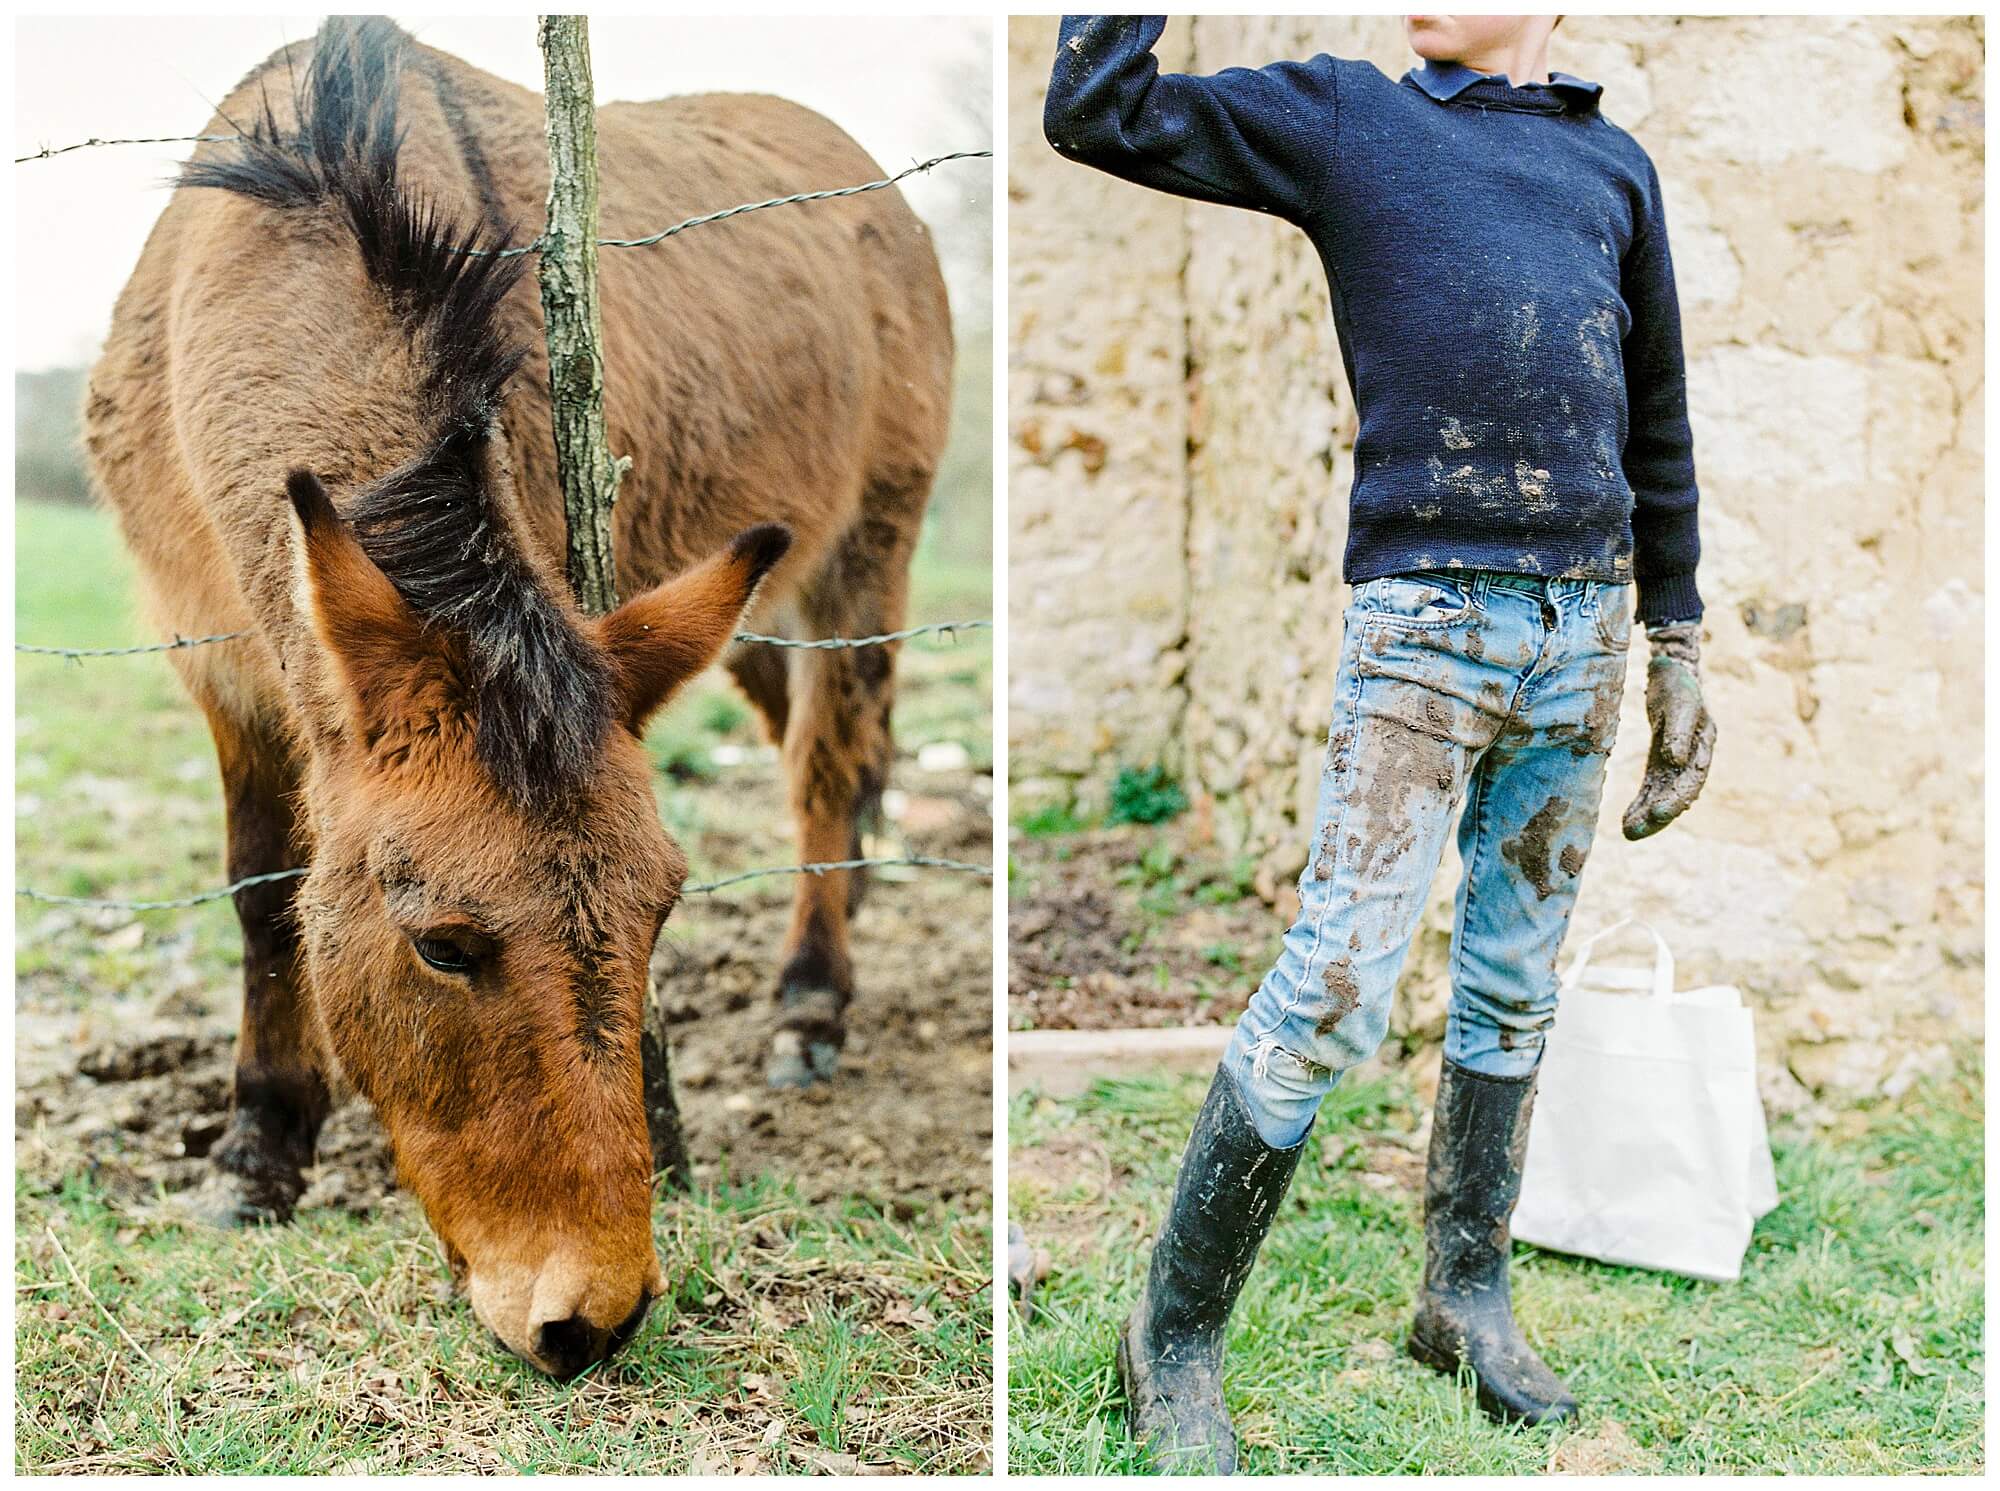 Left: The neighboring donkey grazes on grass. Right: A young boy's sweater and jeans are covered in mud from working in the garden at the French country cottage.